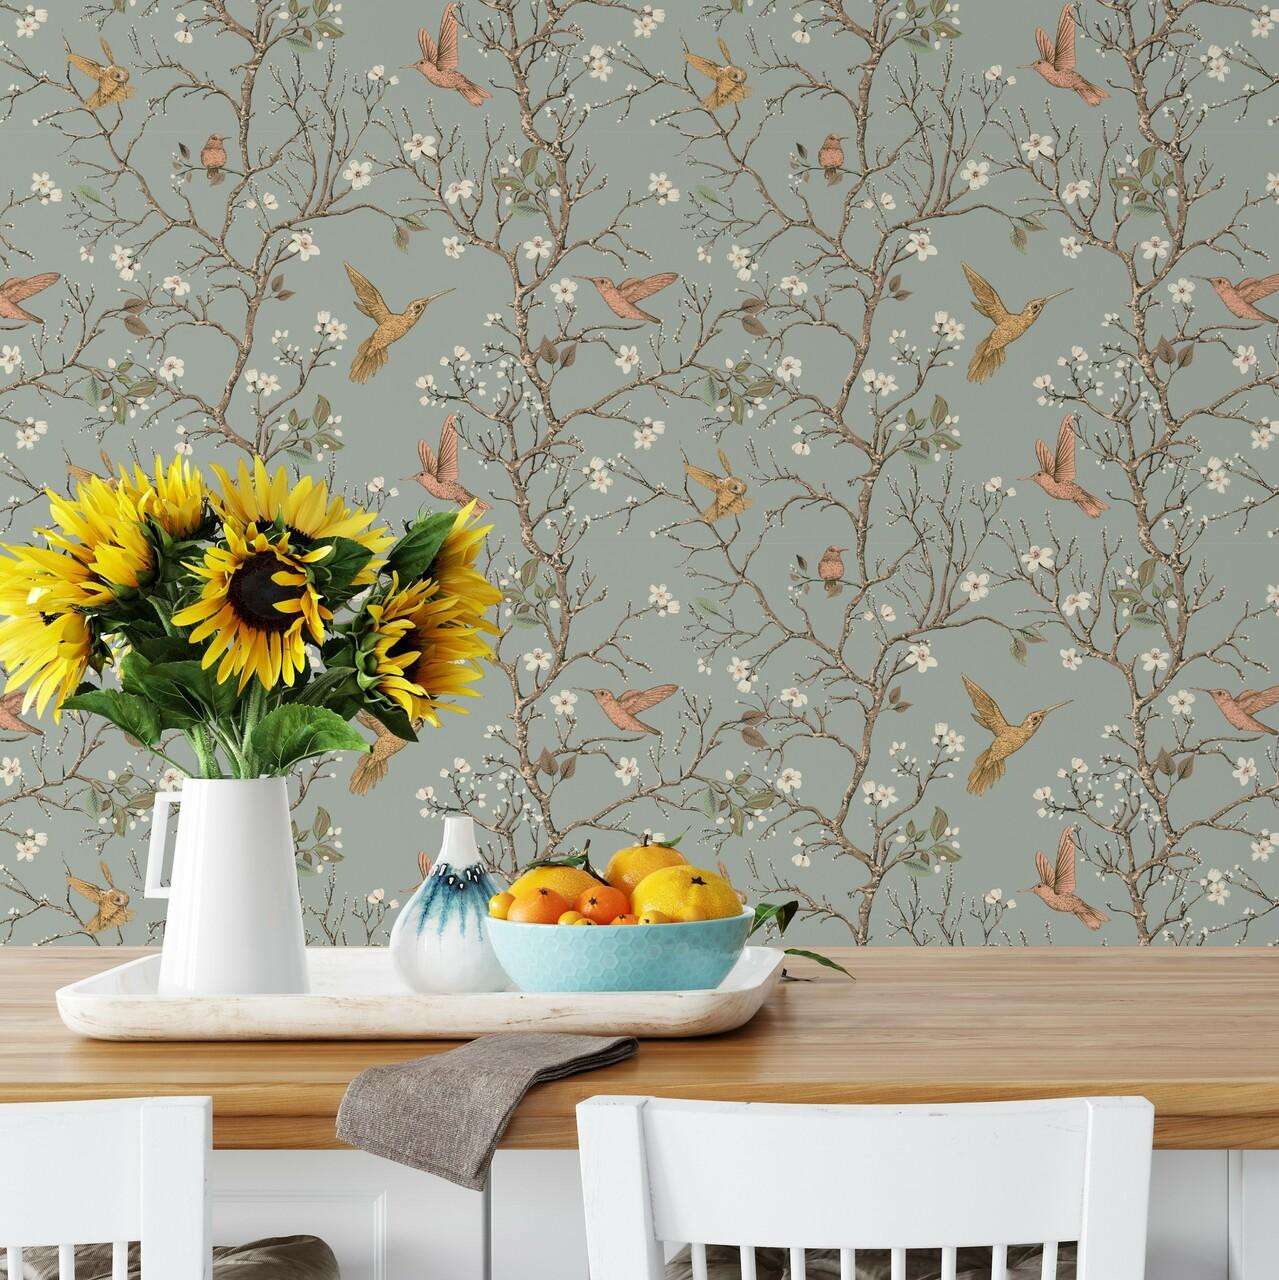 Classic Toile Peel and Stick Wallpaper - Paperbird